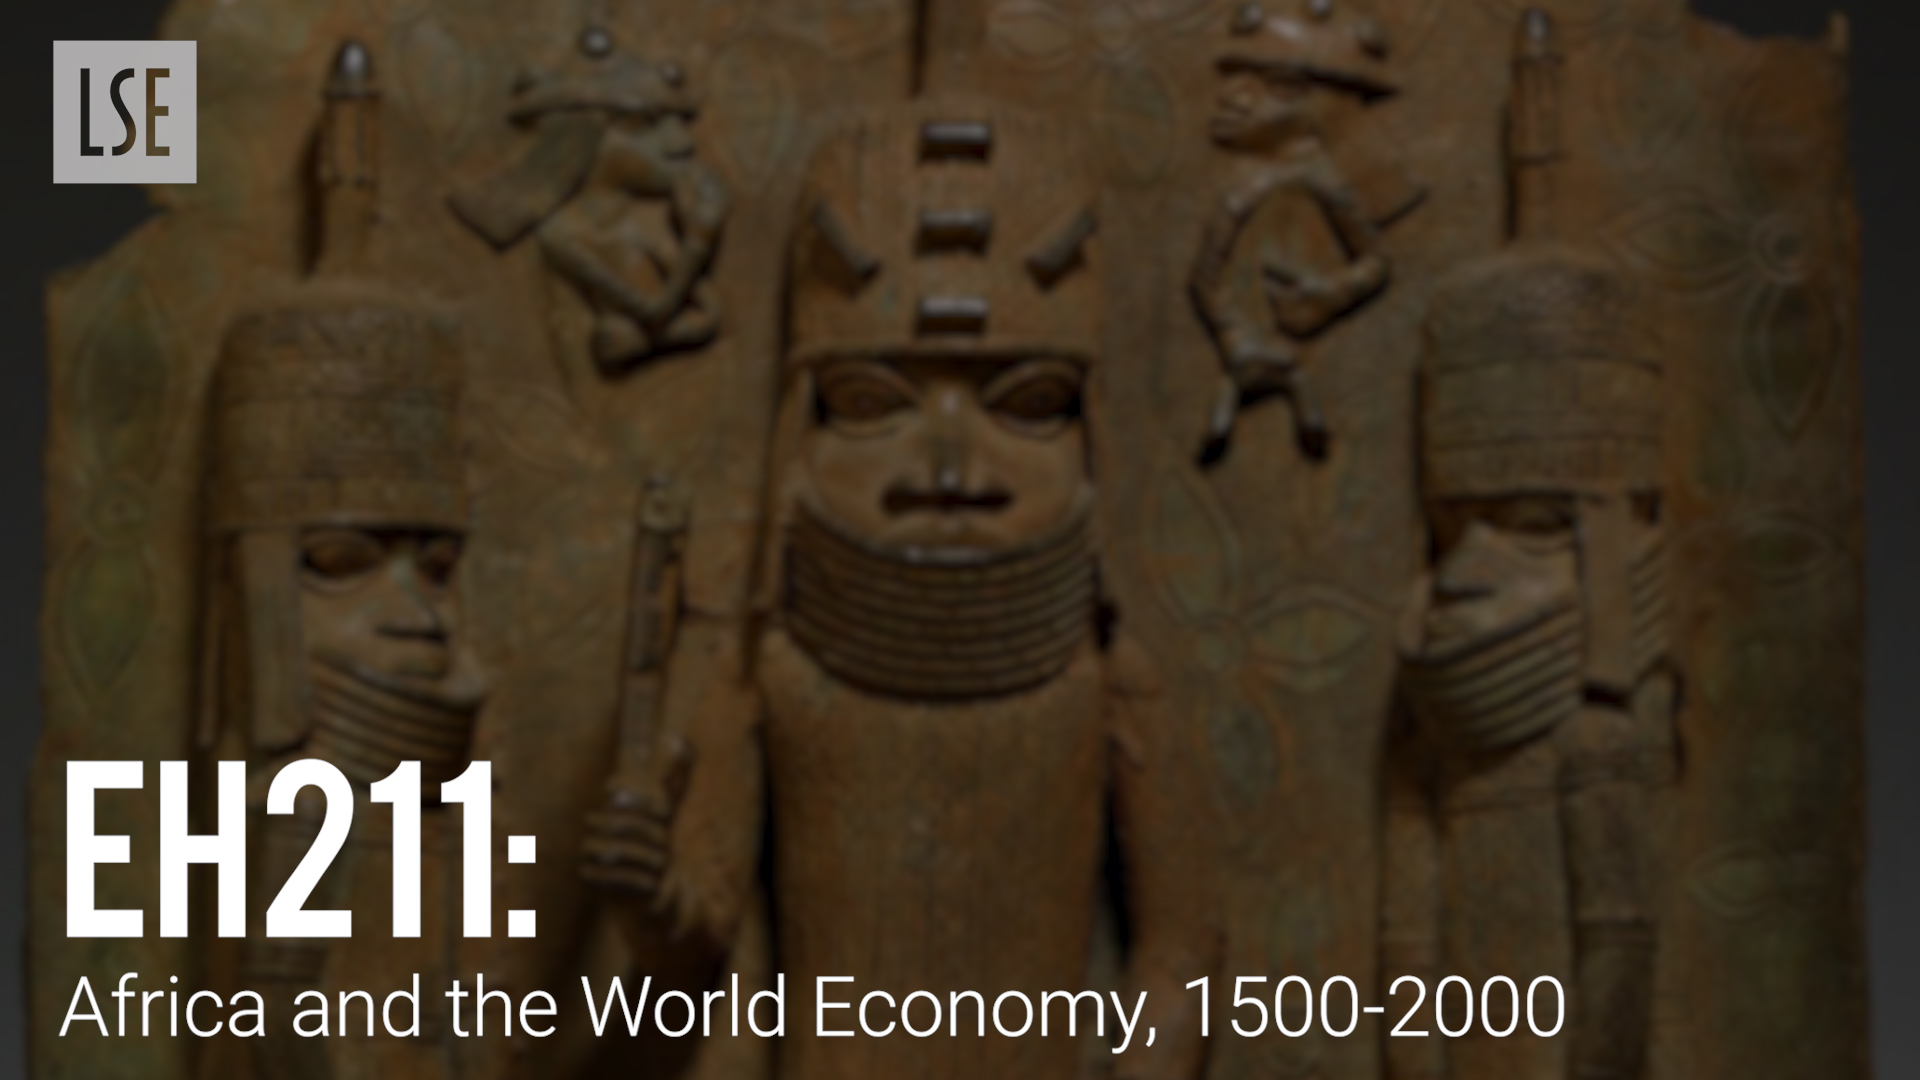 EH211 Africa and the World Economy, 1500-2000, by Dr Leigh Gardner